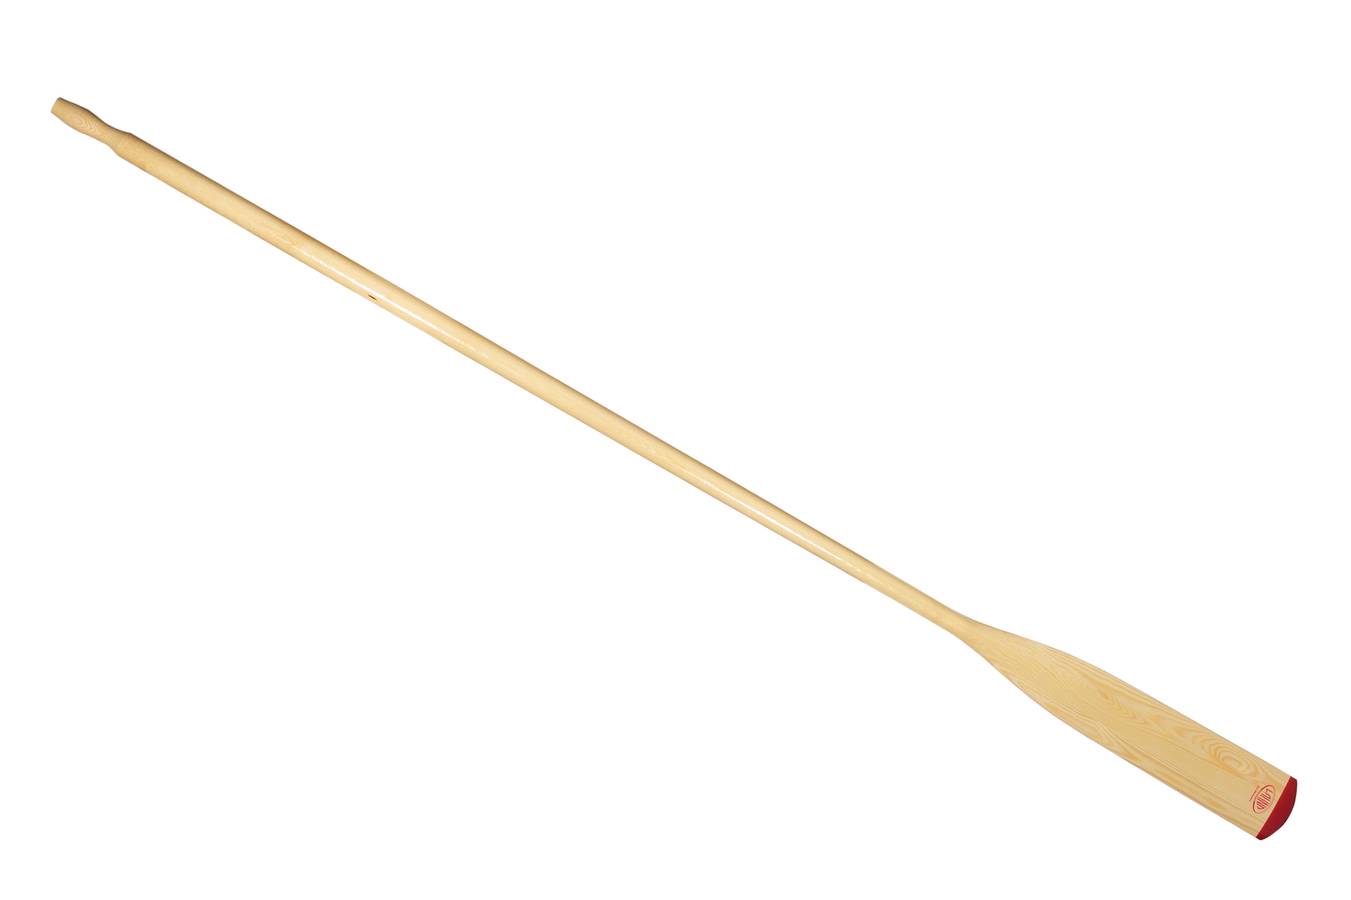 The SeaGrade wooden oars are well-balanced shaped for a smooth rowing stroke